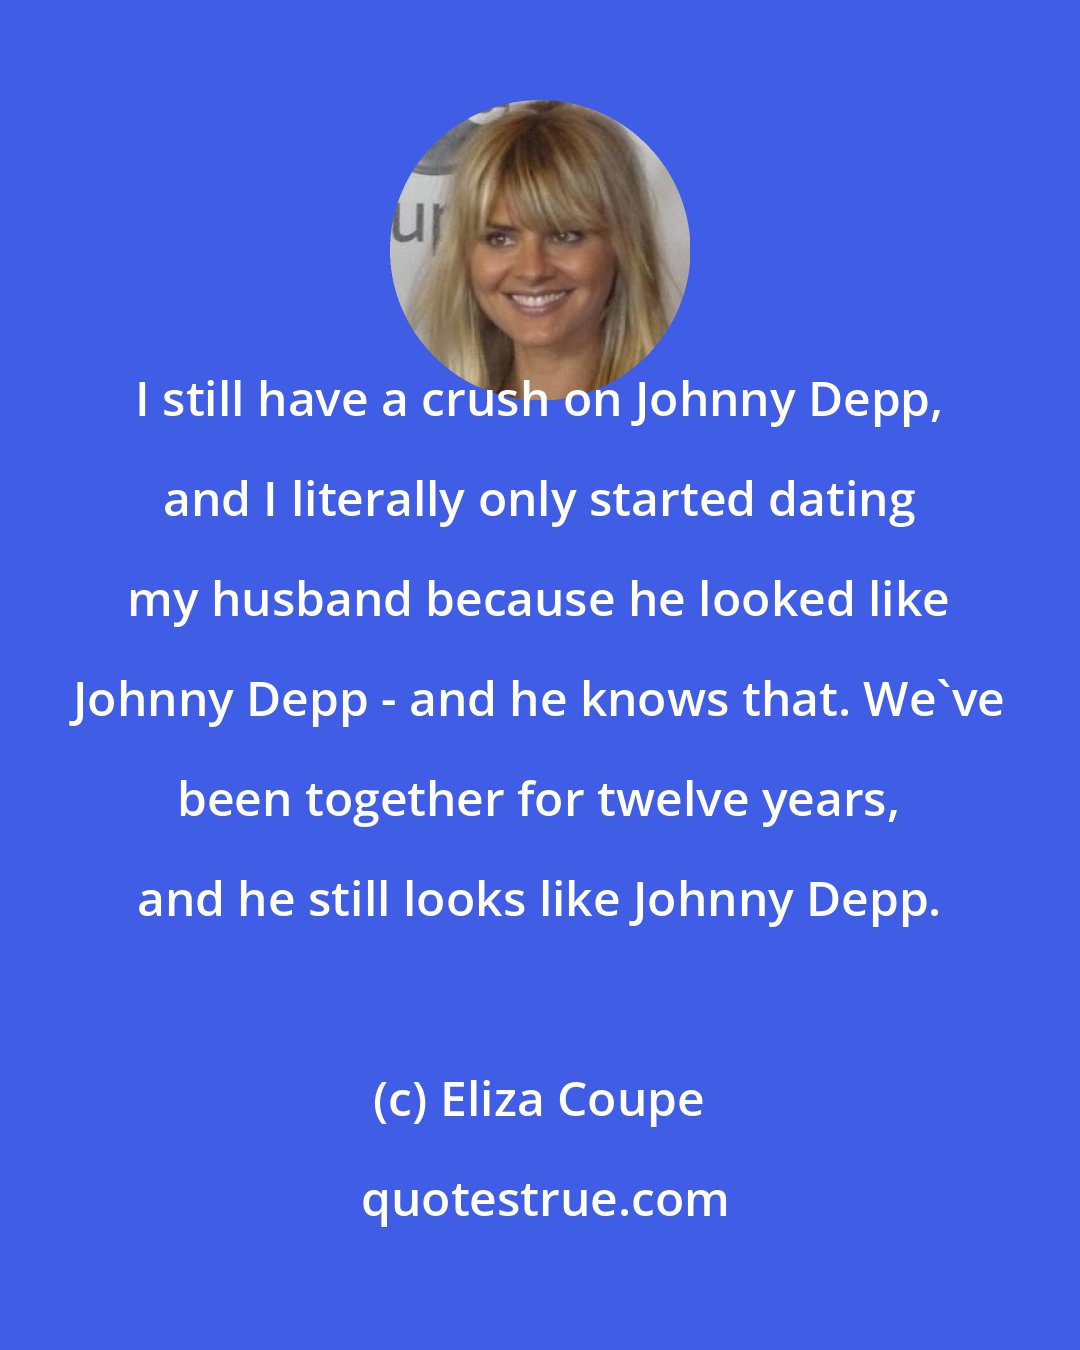 Eliza Coupe: I still have a crush on Johnny Depp, and I literally only started dating my husband because he looked like Johnny Depp - and he knows that. We've been together for twelve years, and he still looks like Johnny Depp.